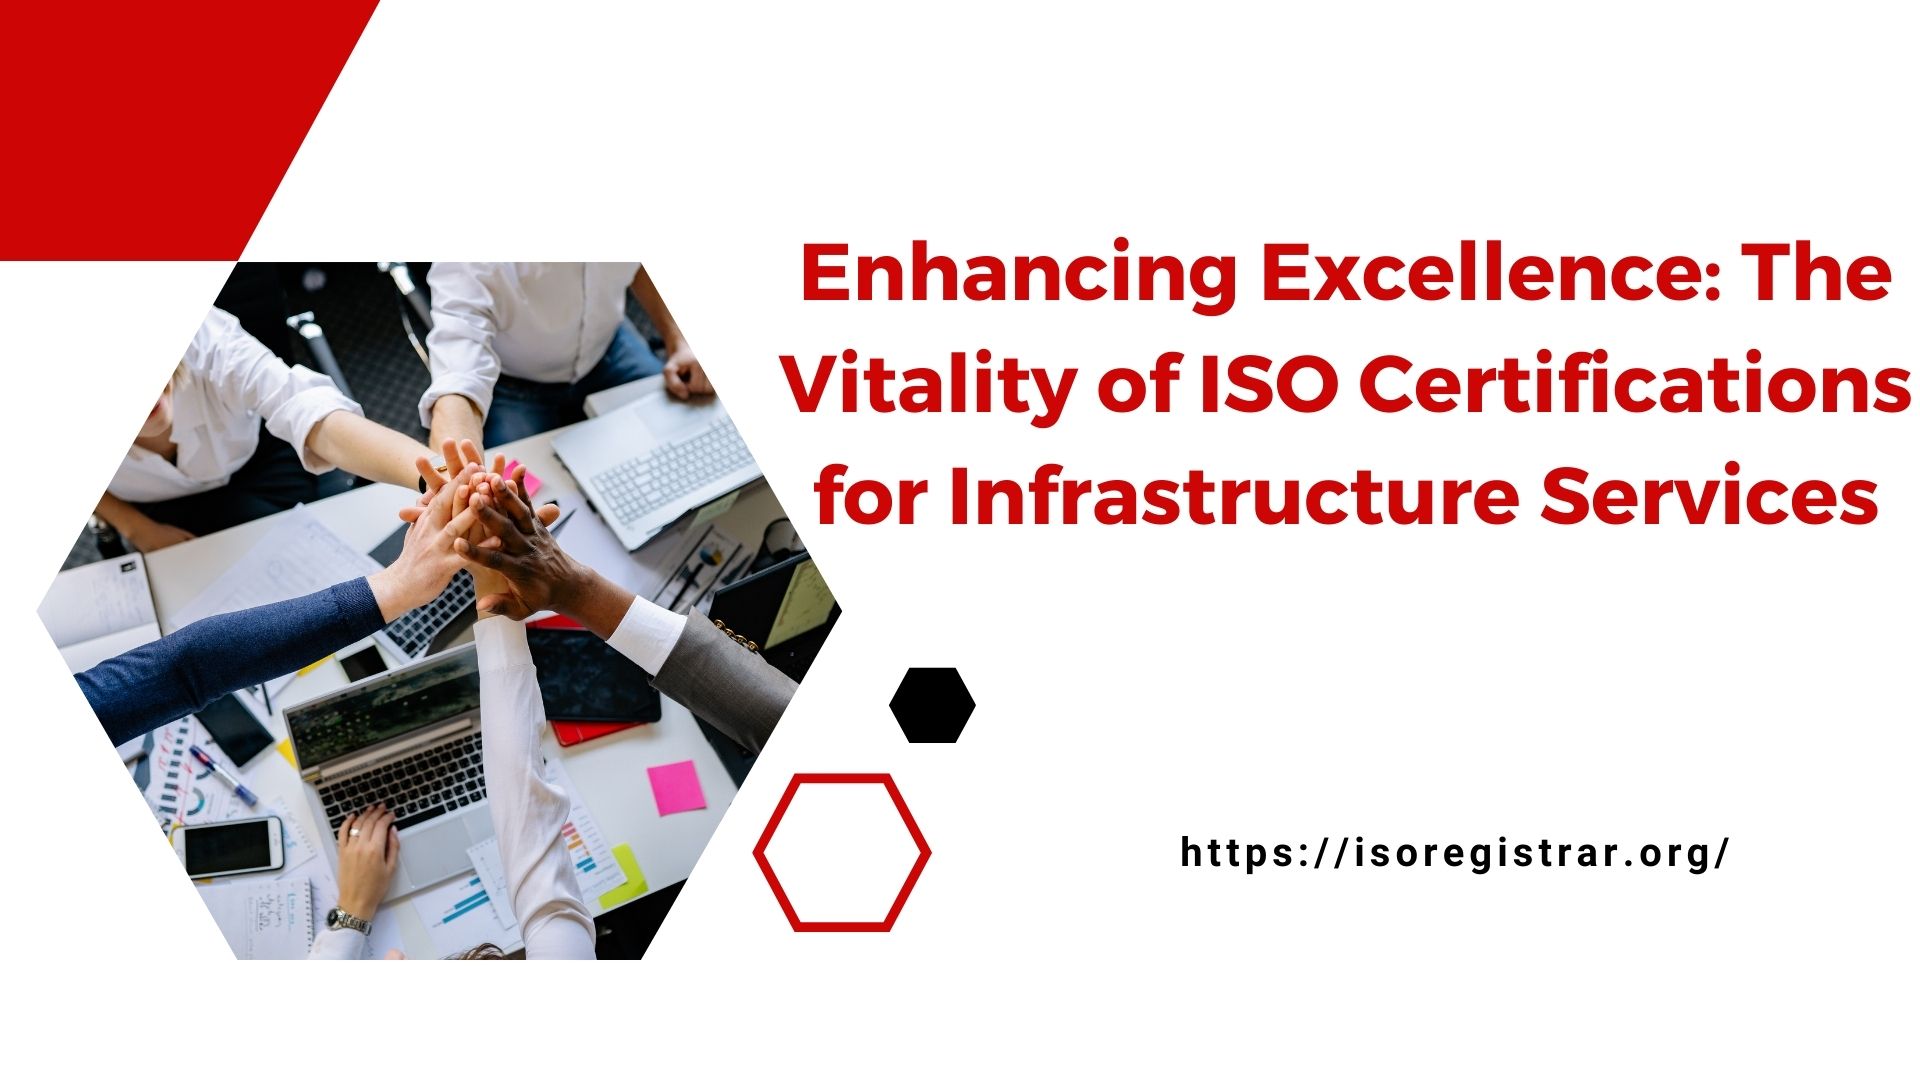 Enhancing Excellence: The Vitality of ISO Certifications for Infrastructure Services